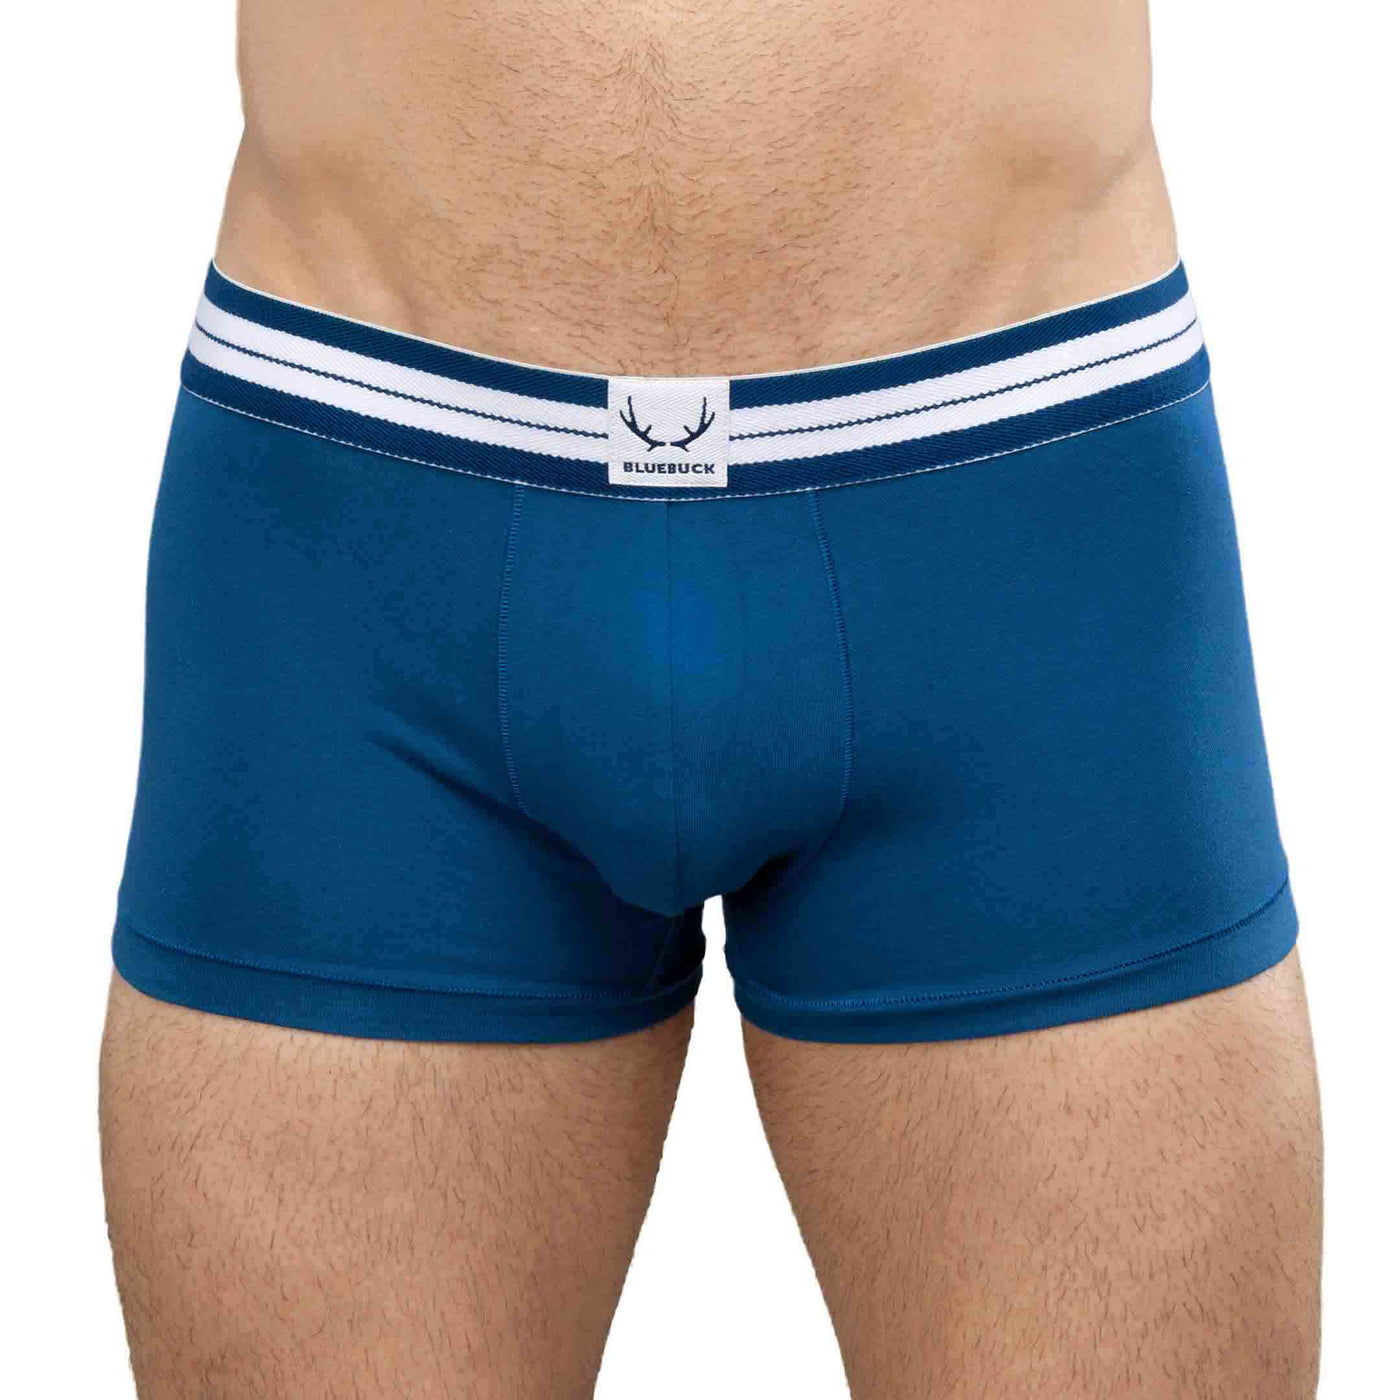 Navy blue organic cotton men's trunks with navy stitching